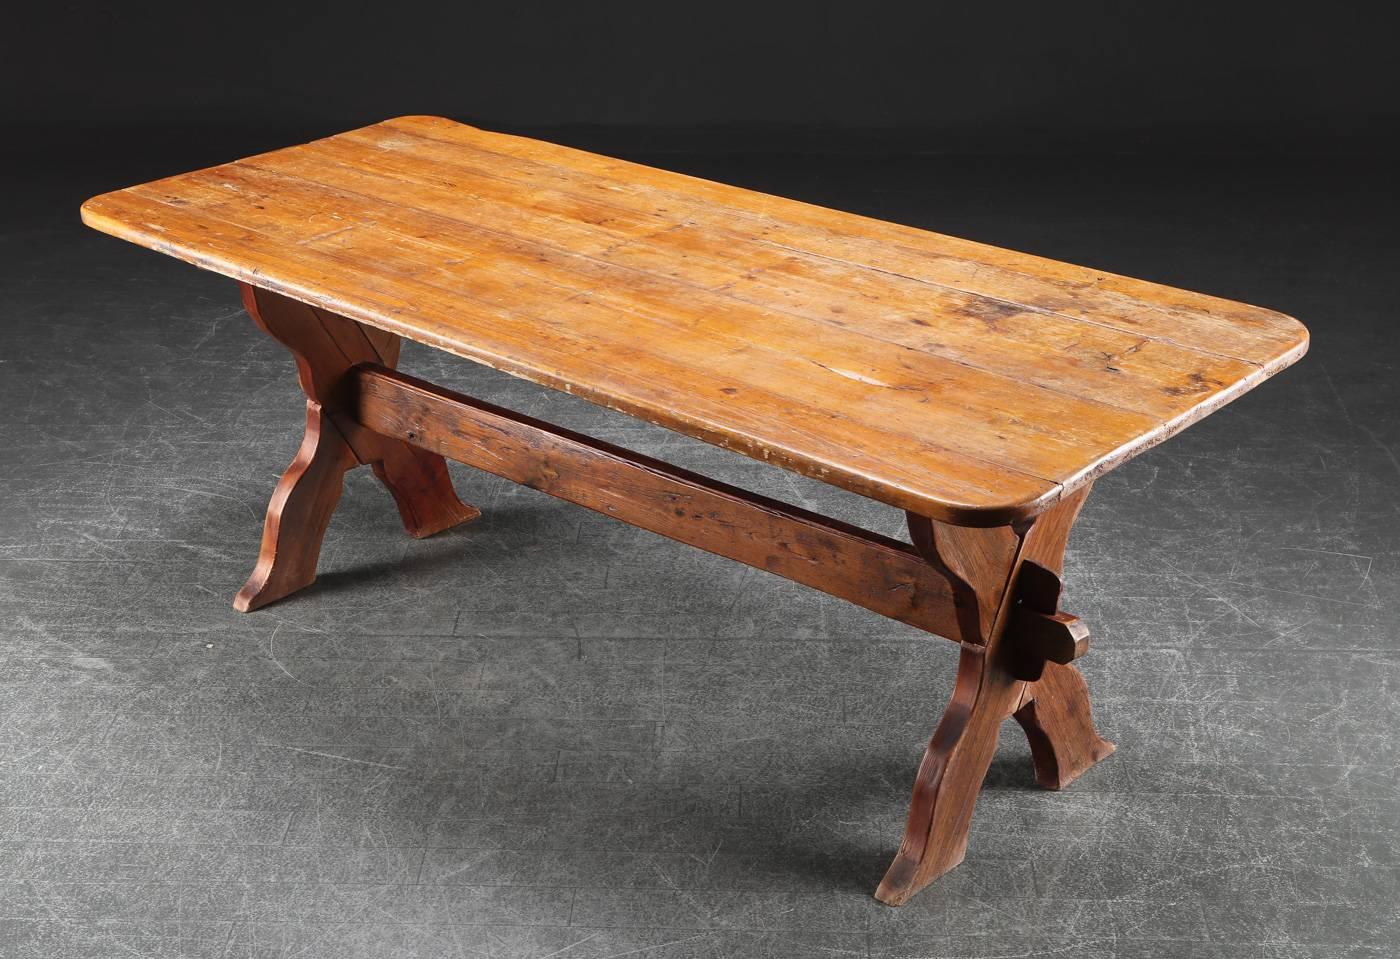 Turn of the century Danish rectangular country pine trestle table with crossbar legs (bolted for stability).